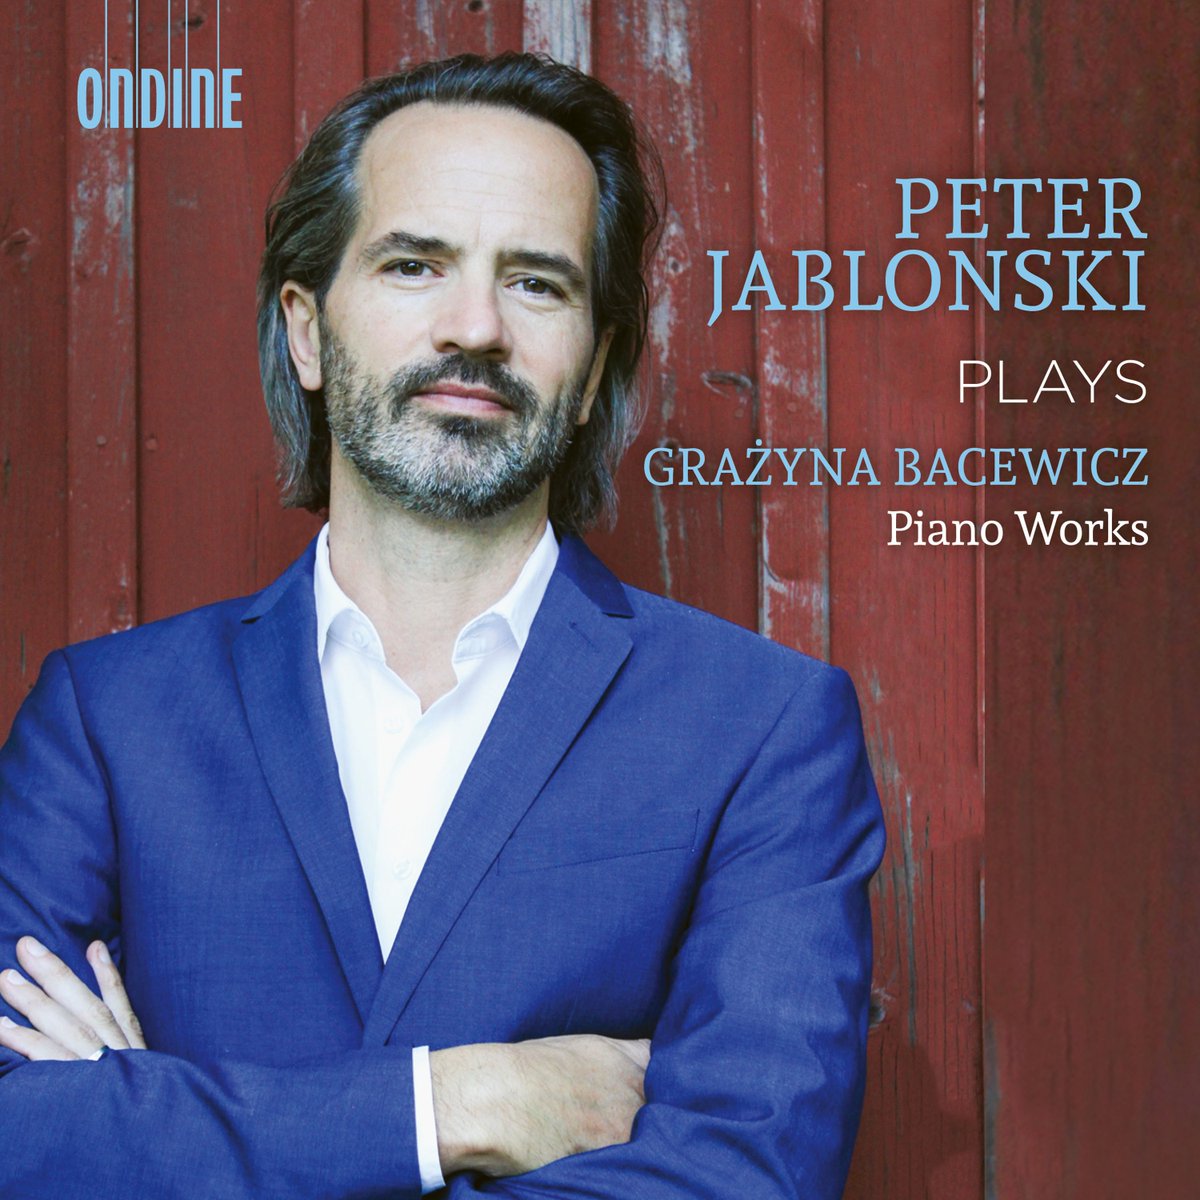 Vote for Peter Jablonski's album of Bacewicz Piano Works, available on @OndineRecords 📩

Nominated in the Instrumental category for the BBC @MusicMagazine's 2023 Awards. Vote now: lnk.to/bbcmm2023

#BBCMMAwards